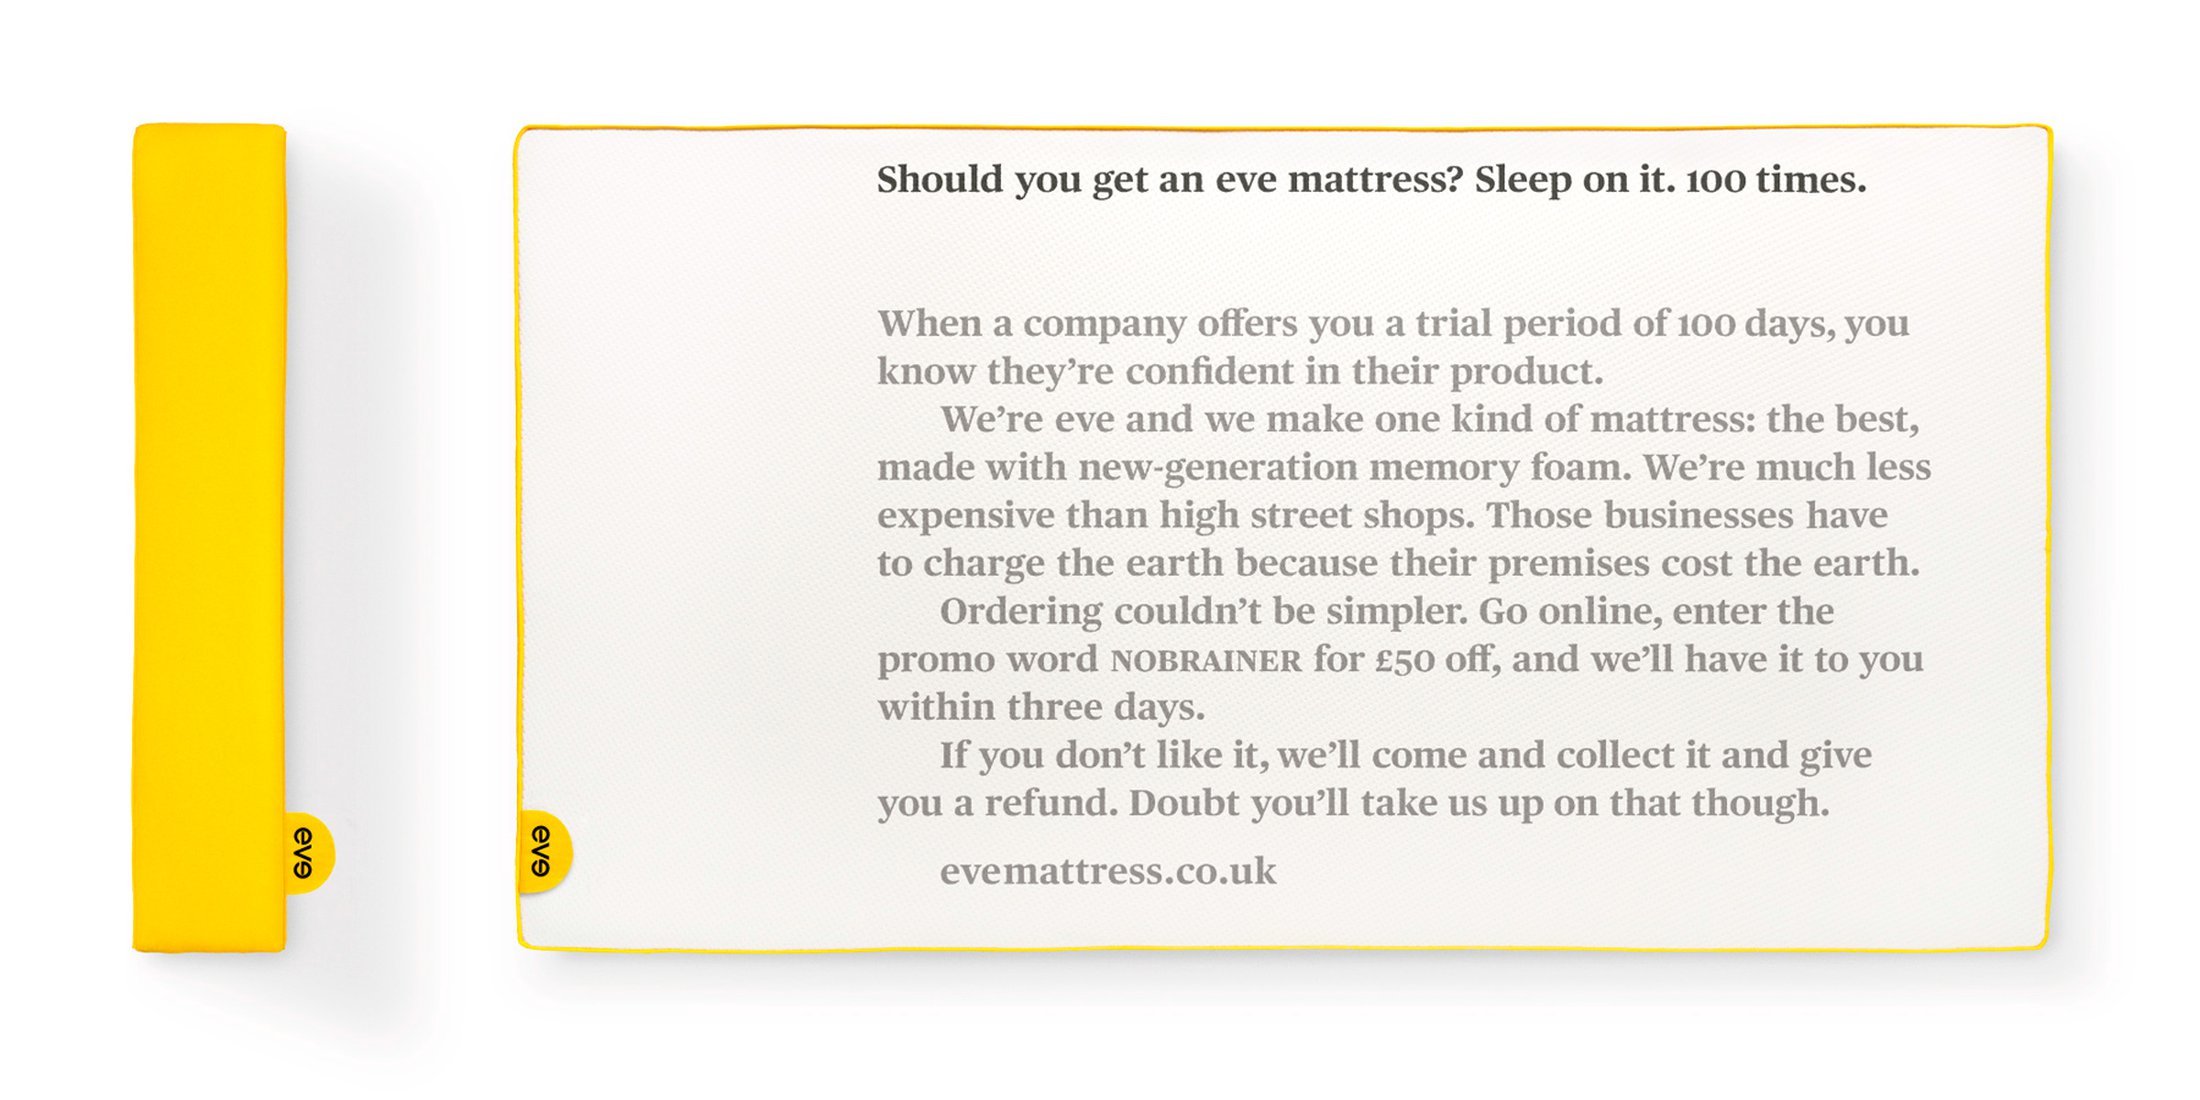 Advertising poster campaign appearing on the London Underground, aimed at tired commuters.

On the back of the campaign, the brand saw a significant increase in brand-related searches, with consumers looking for ‘eve mattresses’ rather than just ‘mattresses’. Similarly, its level of brand awareness in London rose from 0% to 12% in the space of a month.